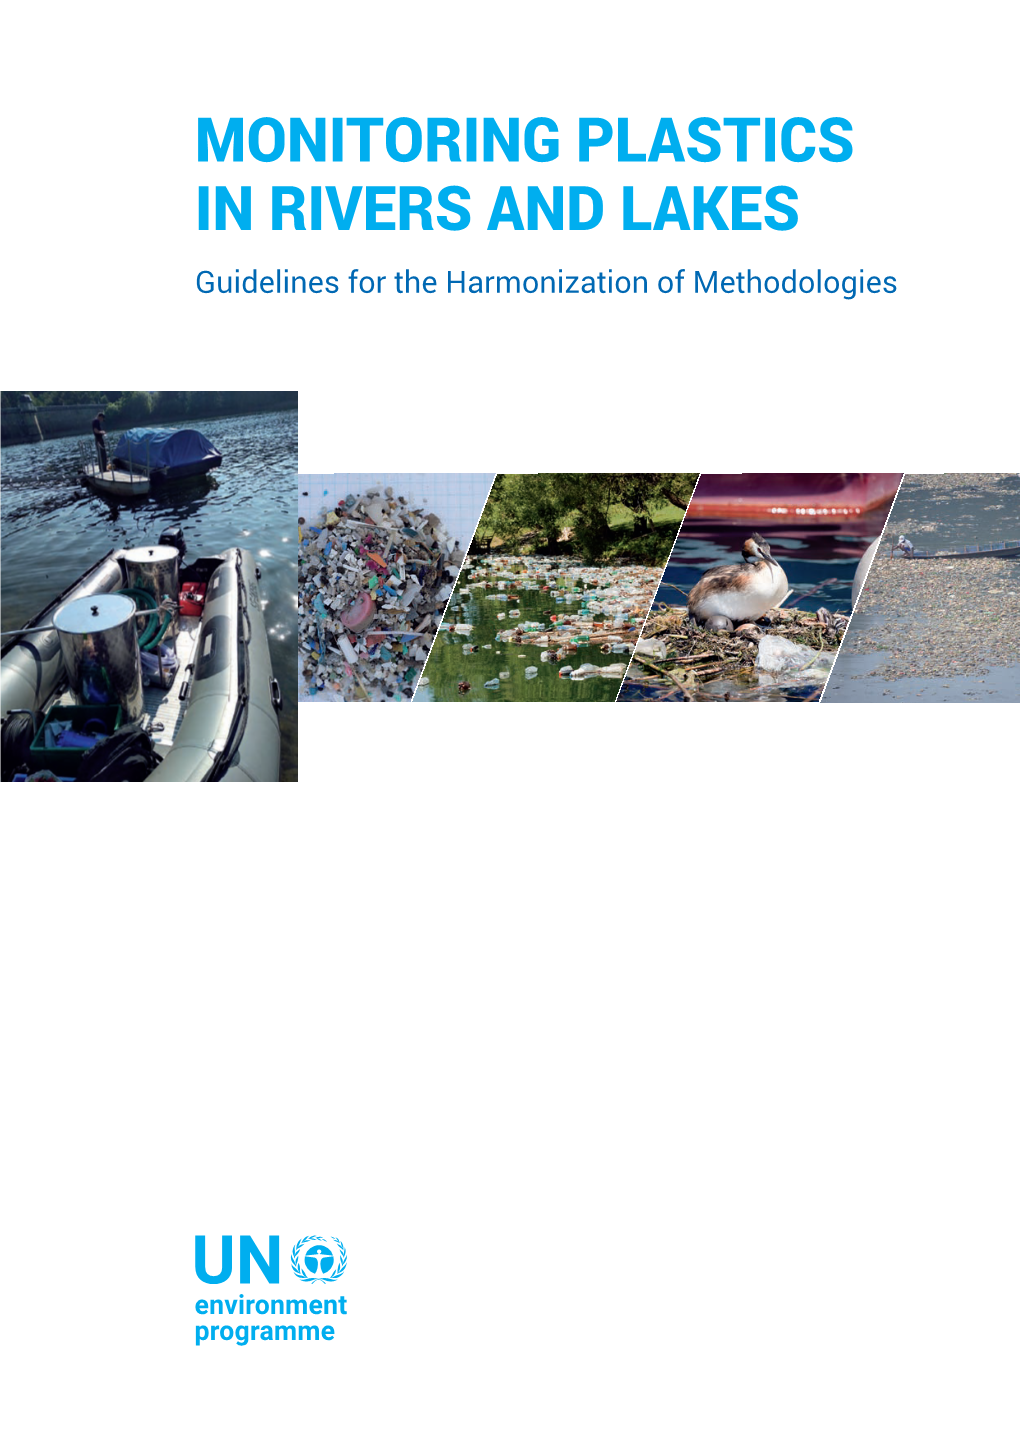 MONITORING PLASTICS in RIVERS and LAKES Guidelines for the Harmonization of Methodologies © 2020 United Nations Environment Programme